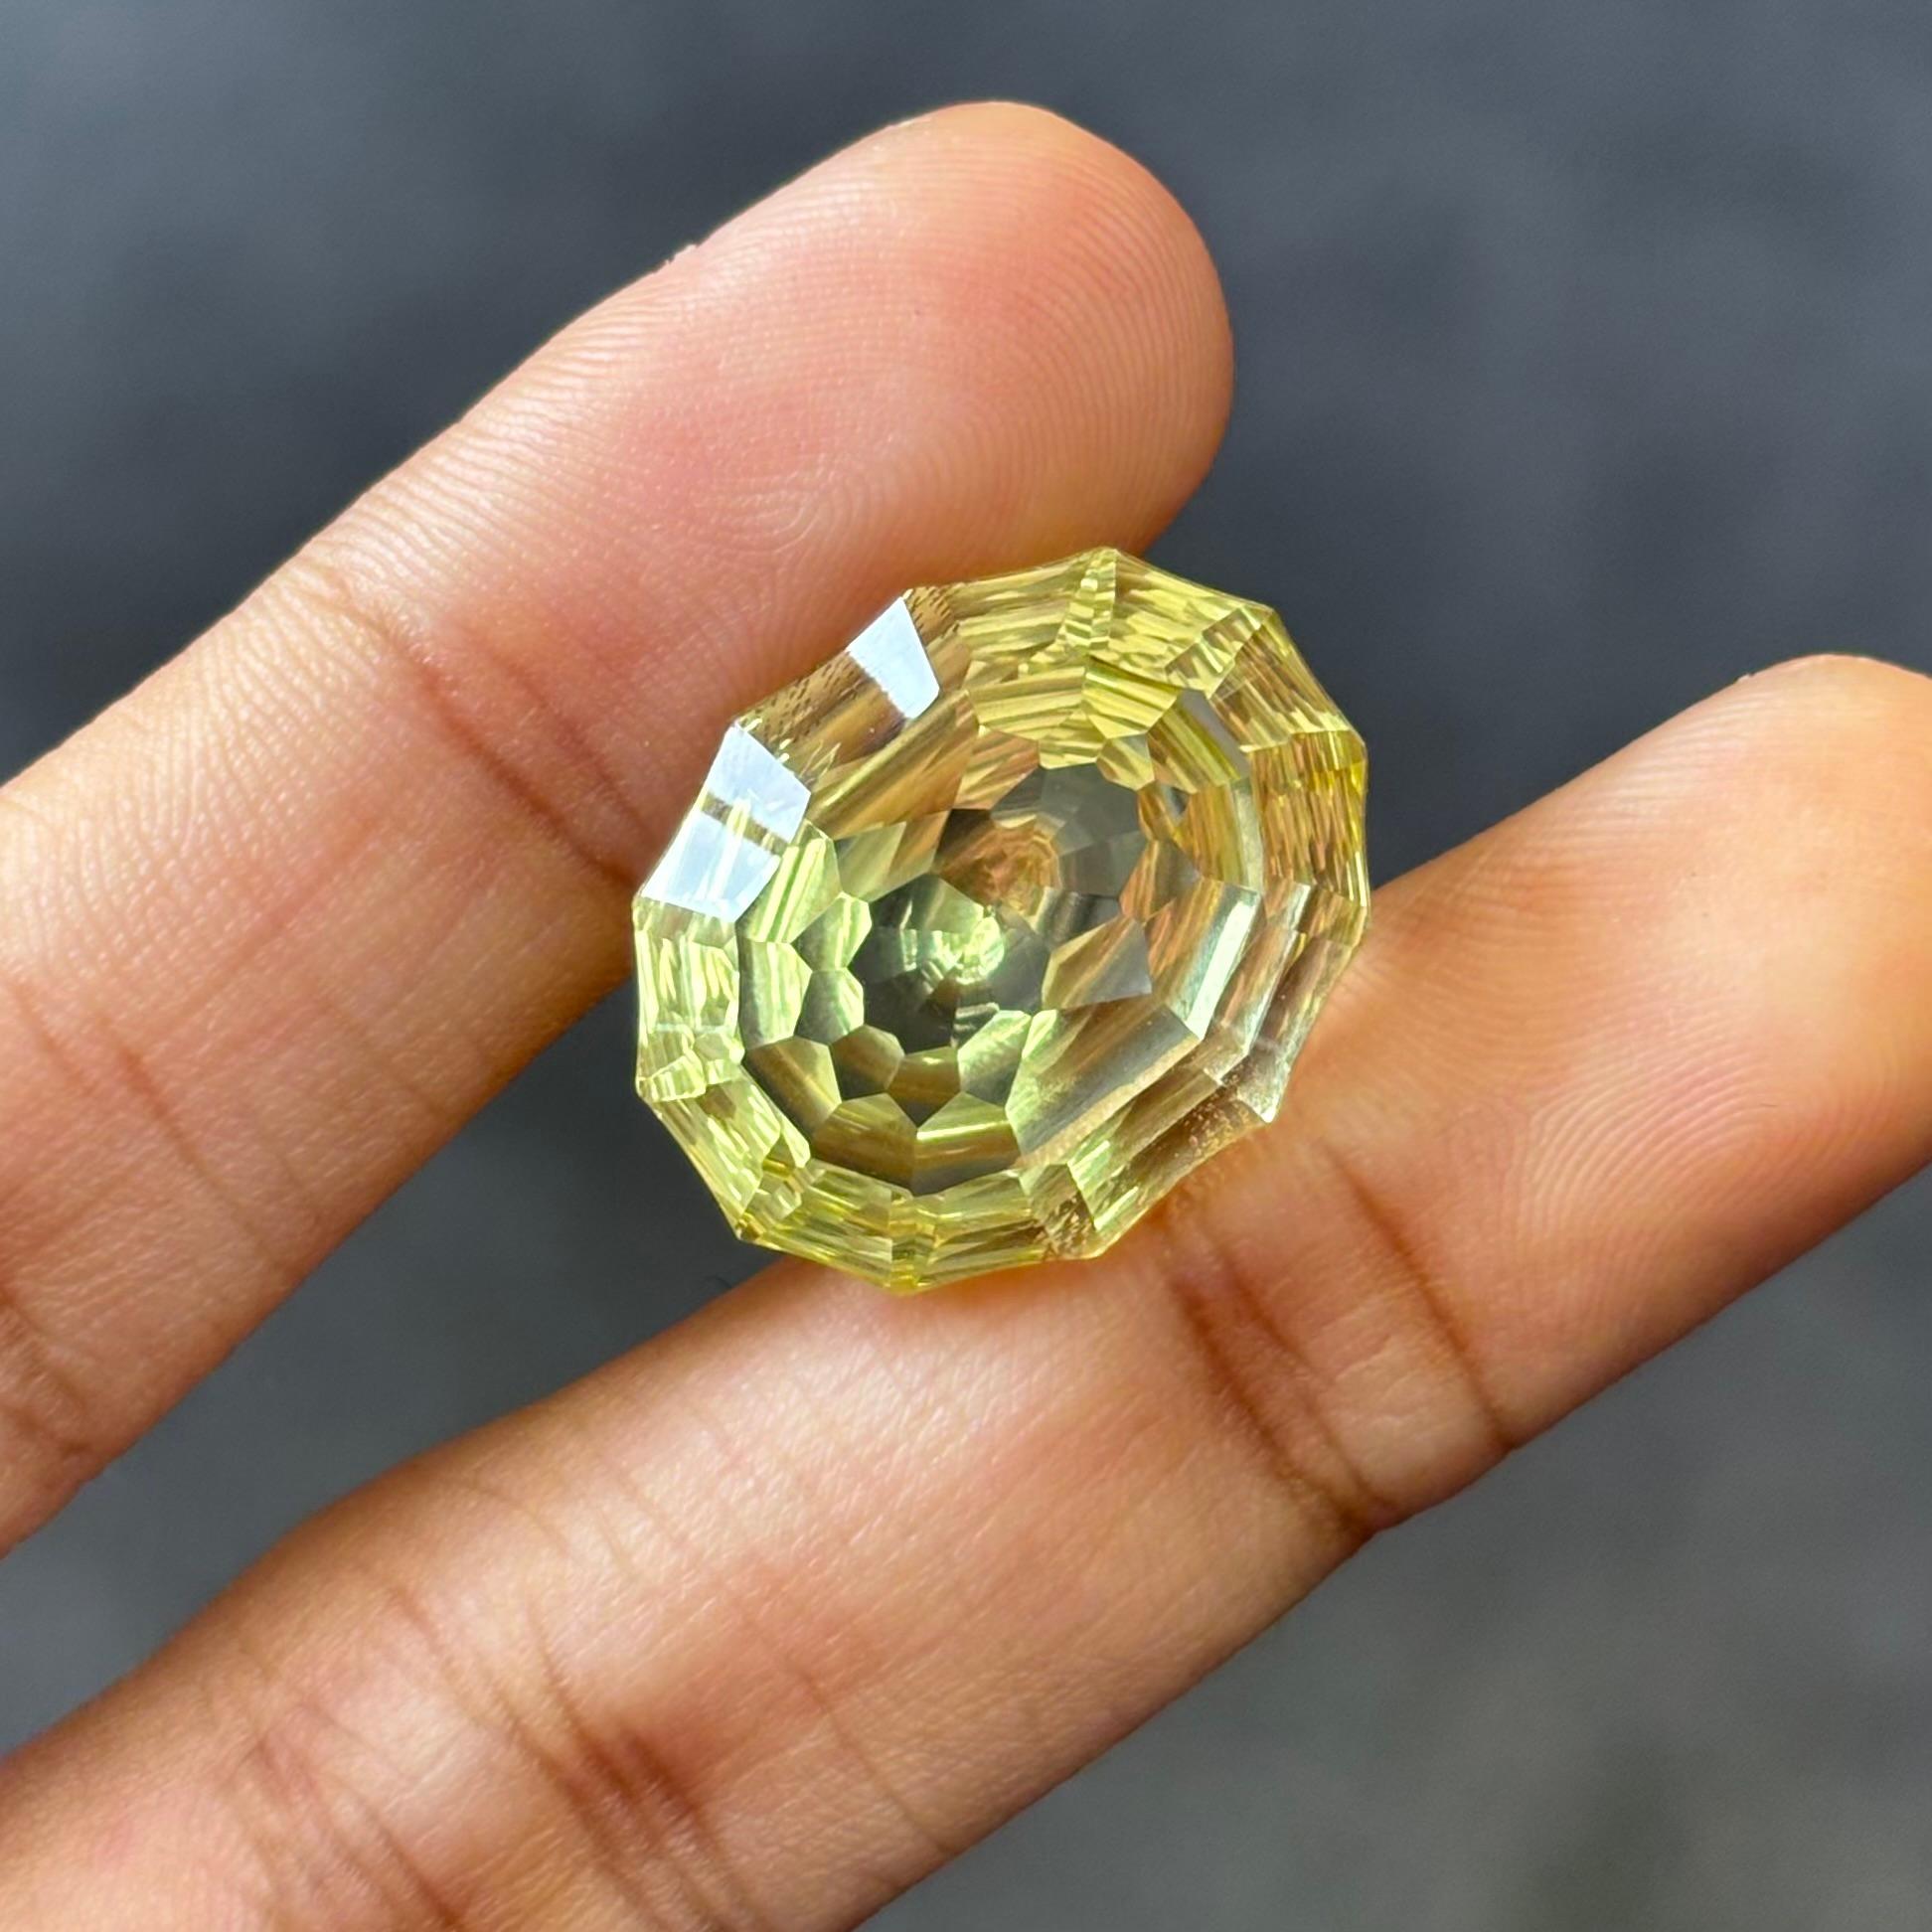 A gorgeous 17.48 Carat Quartz gemstone. It is completely natural and it is a clean stone.  The quartz has a unique and breath-taking  lemon yellow color that is sure to allure you at first sight! It is cut to perfection in a distinct and fancy oval